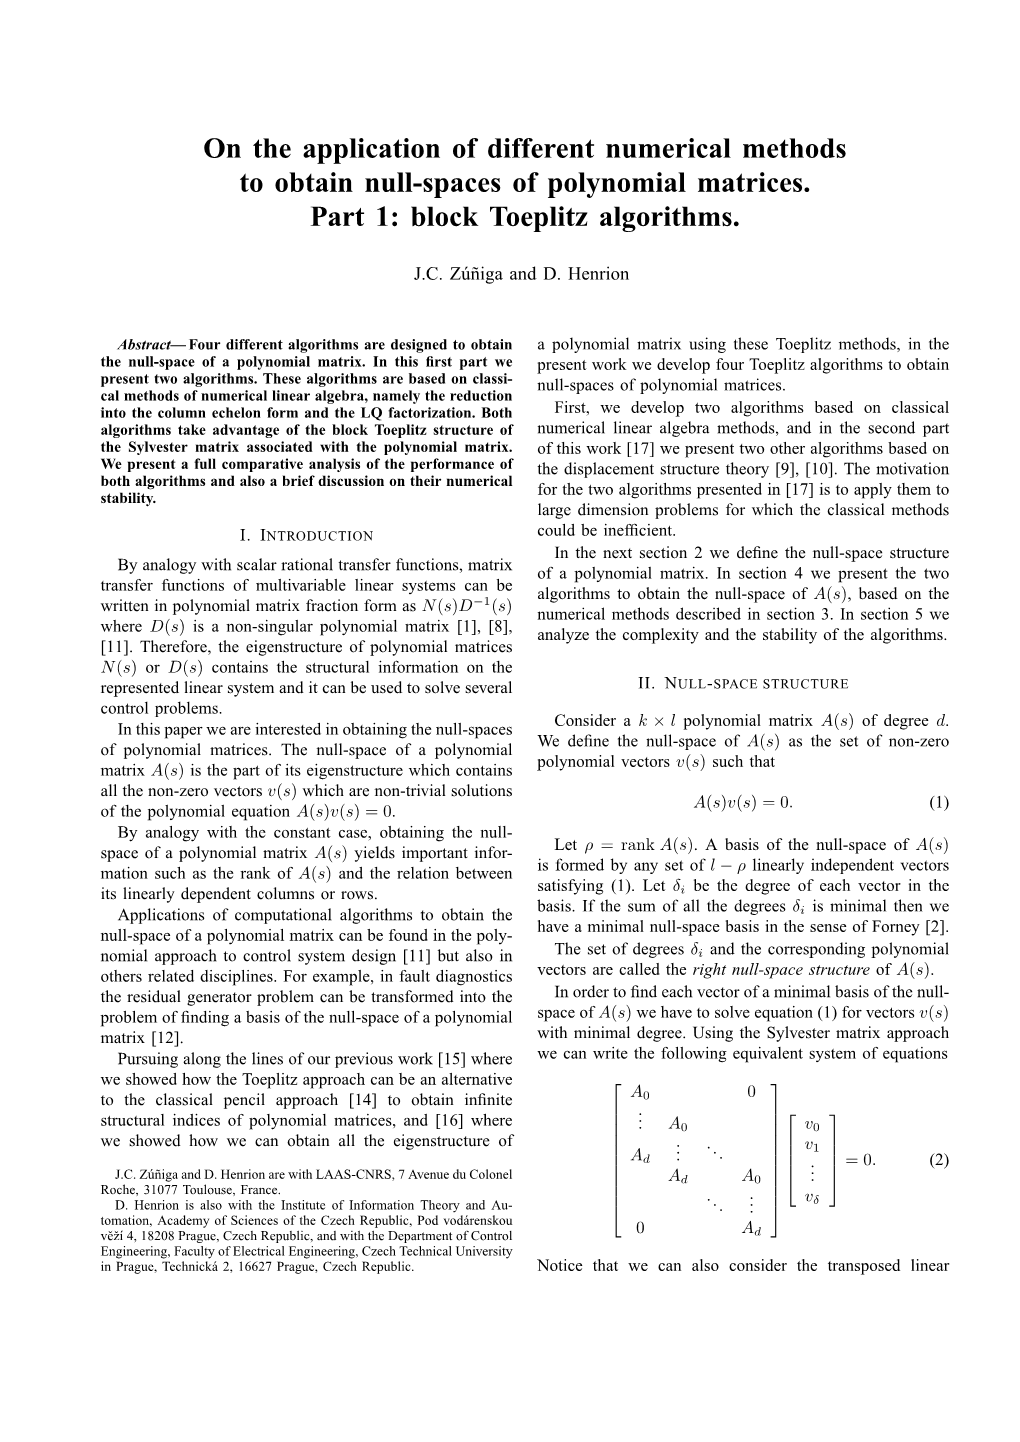 On the Application of Different Numerical Methods to Obtain Null-Spaces of Polynomial Matrices